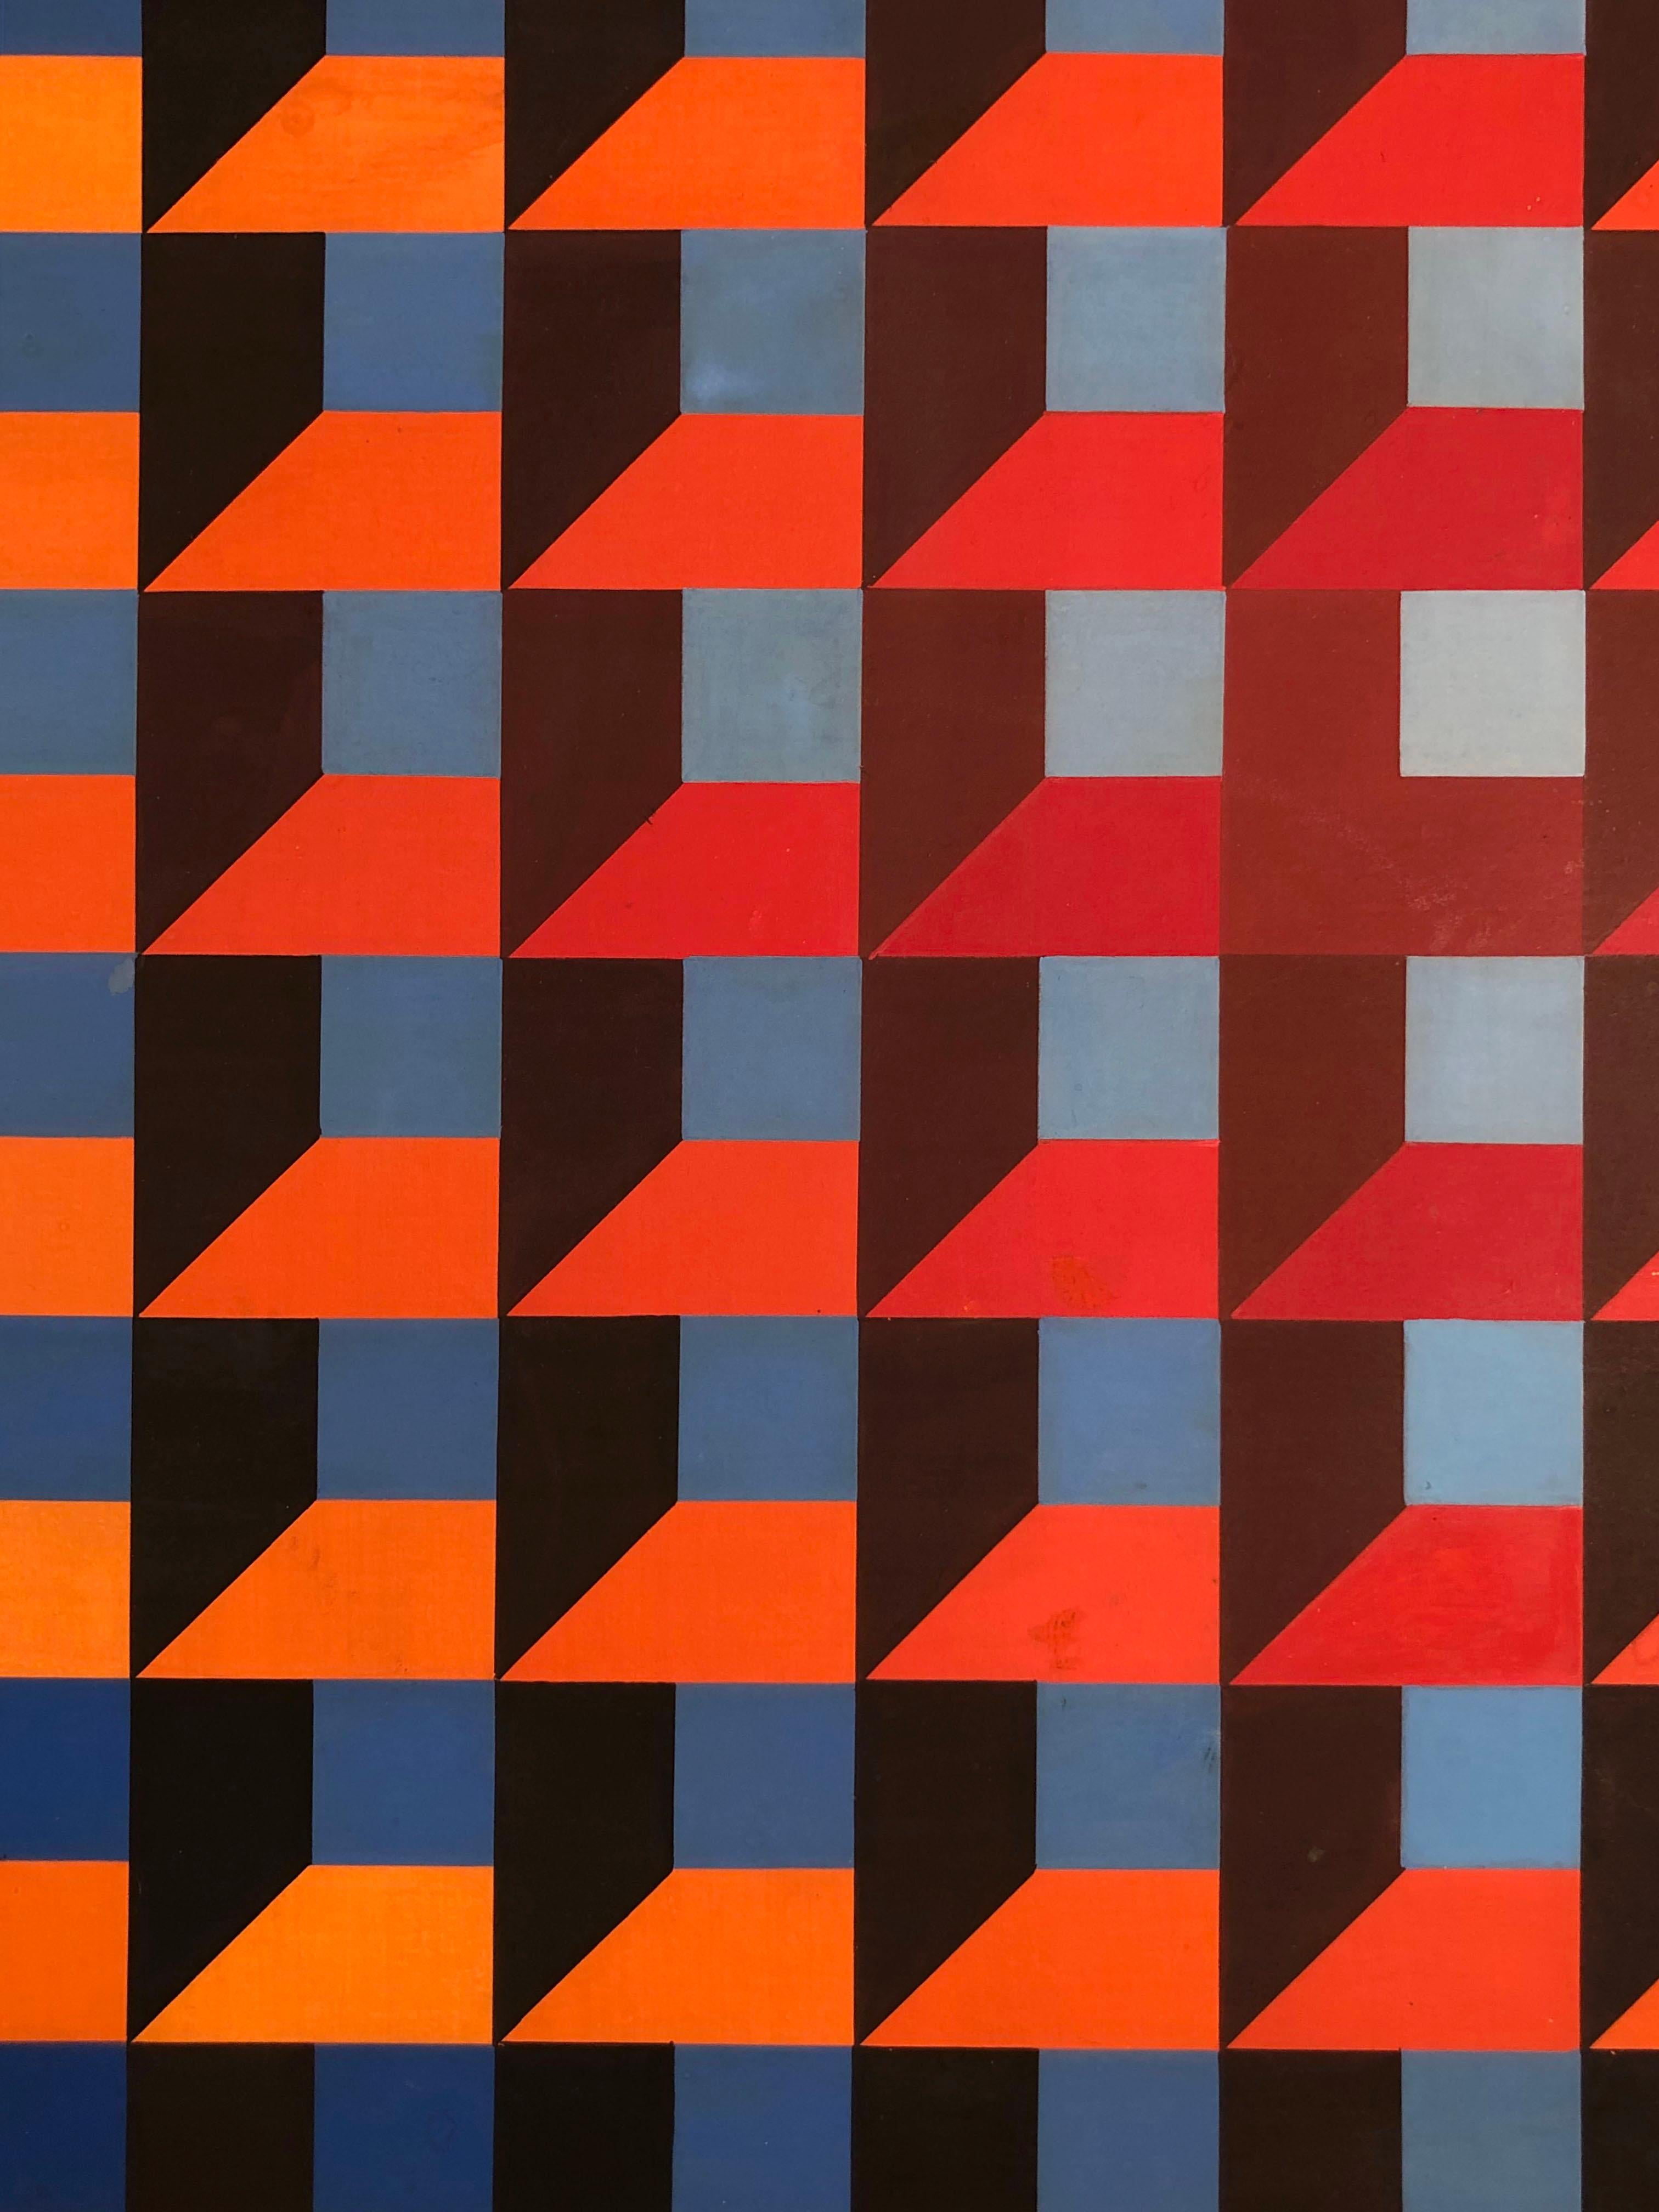 Kinetic An OP-ART KINETIC PAINTING on Panel by JEAN-PIERRE YVARAL VASARELY, France 1968 For Sale